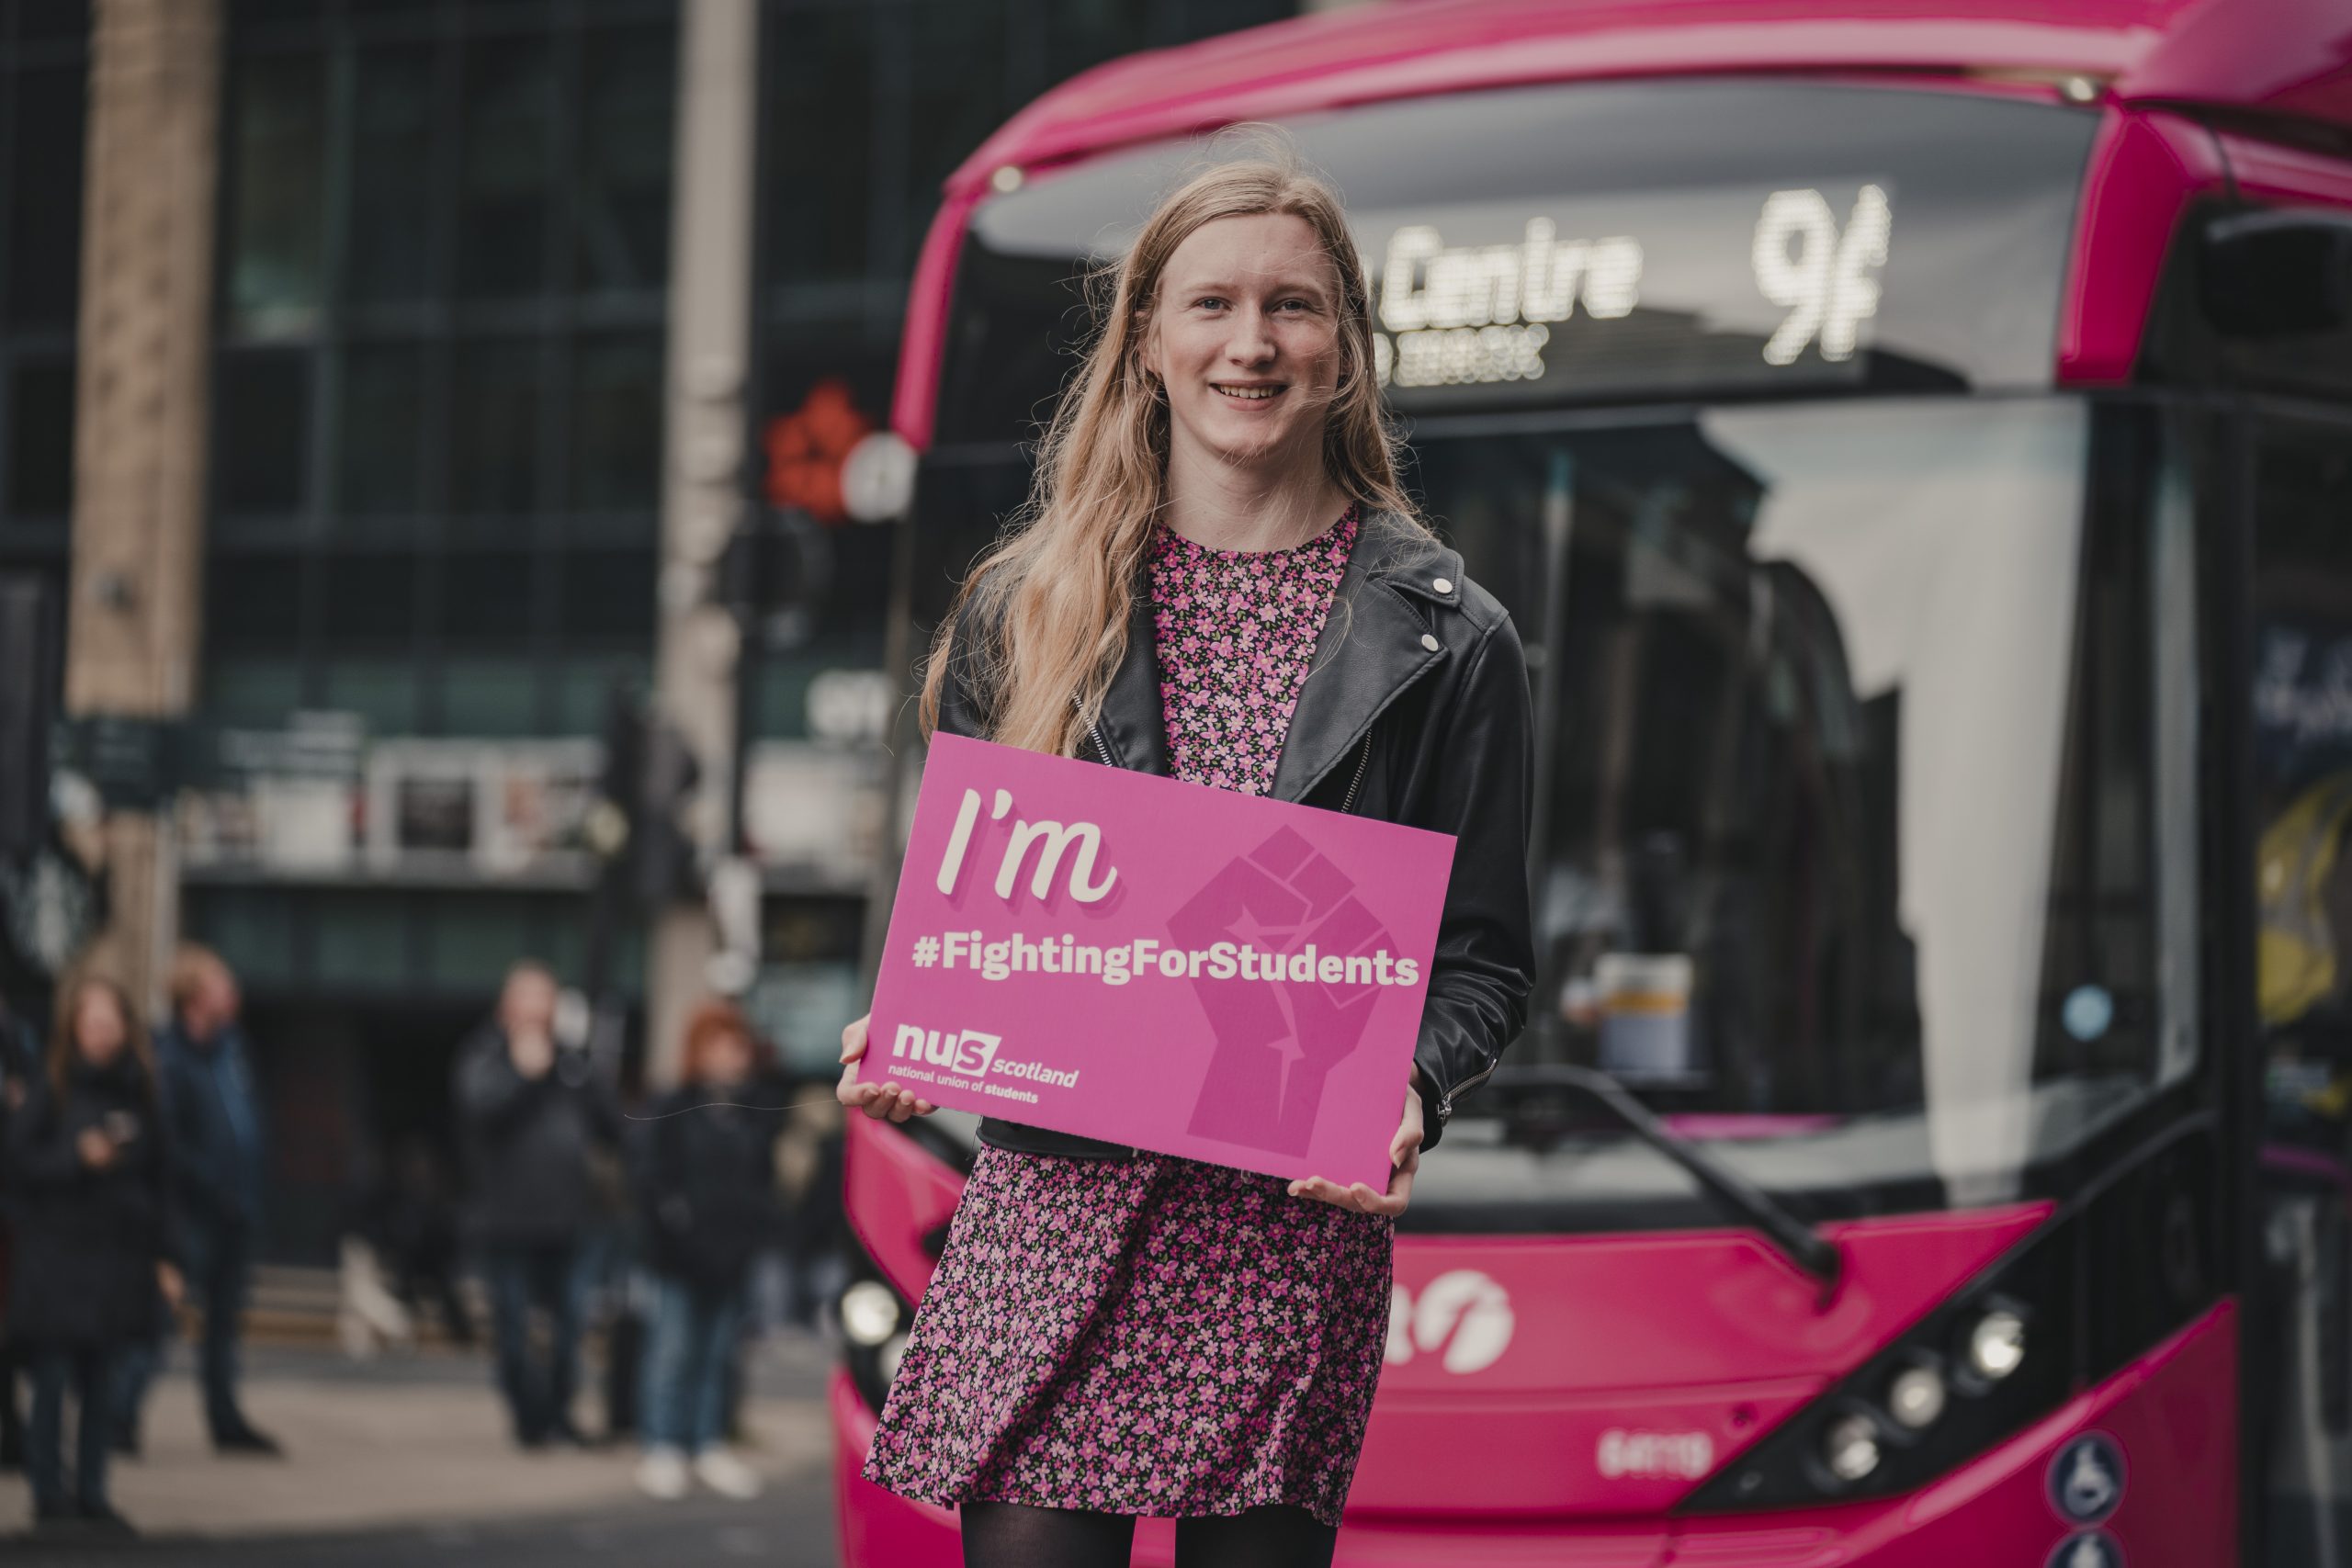 A woman, standing in front of a bus with a sign reading "I'm #FightingForStudents"